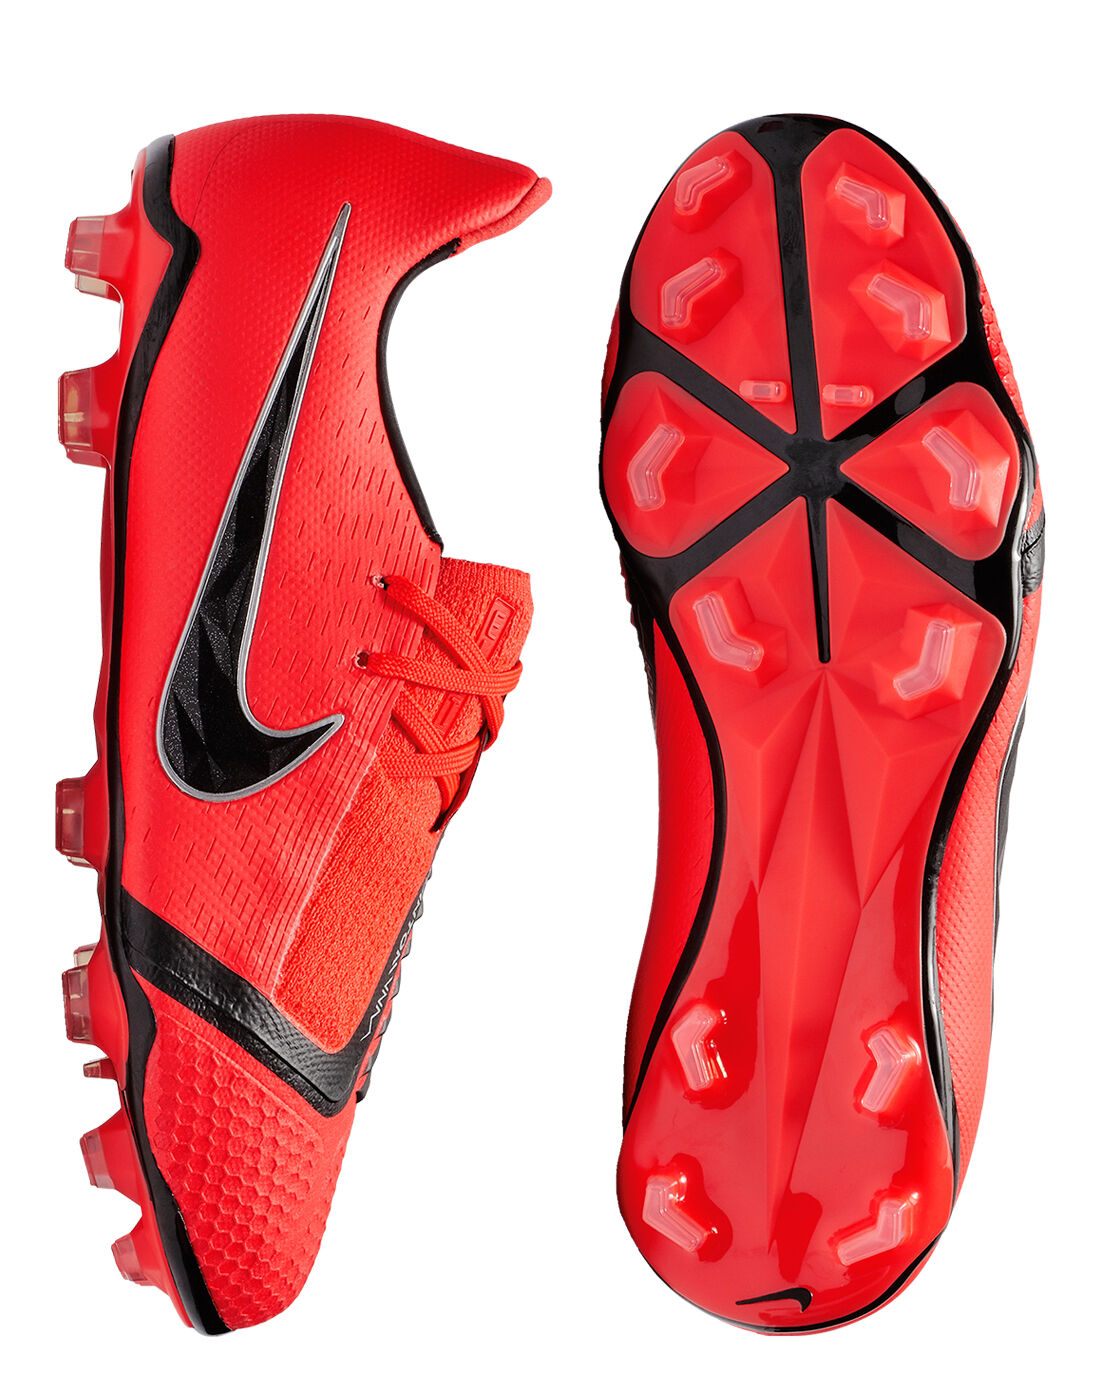 lifestyle sports football boots